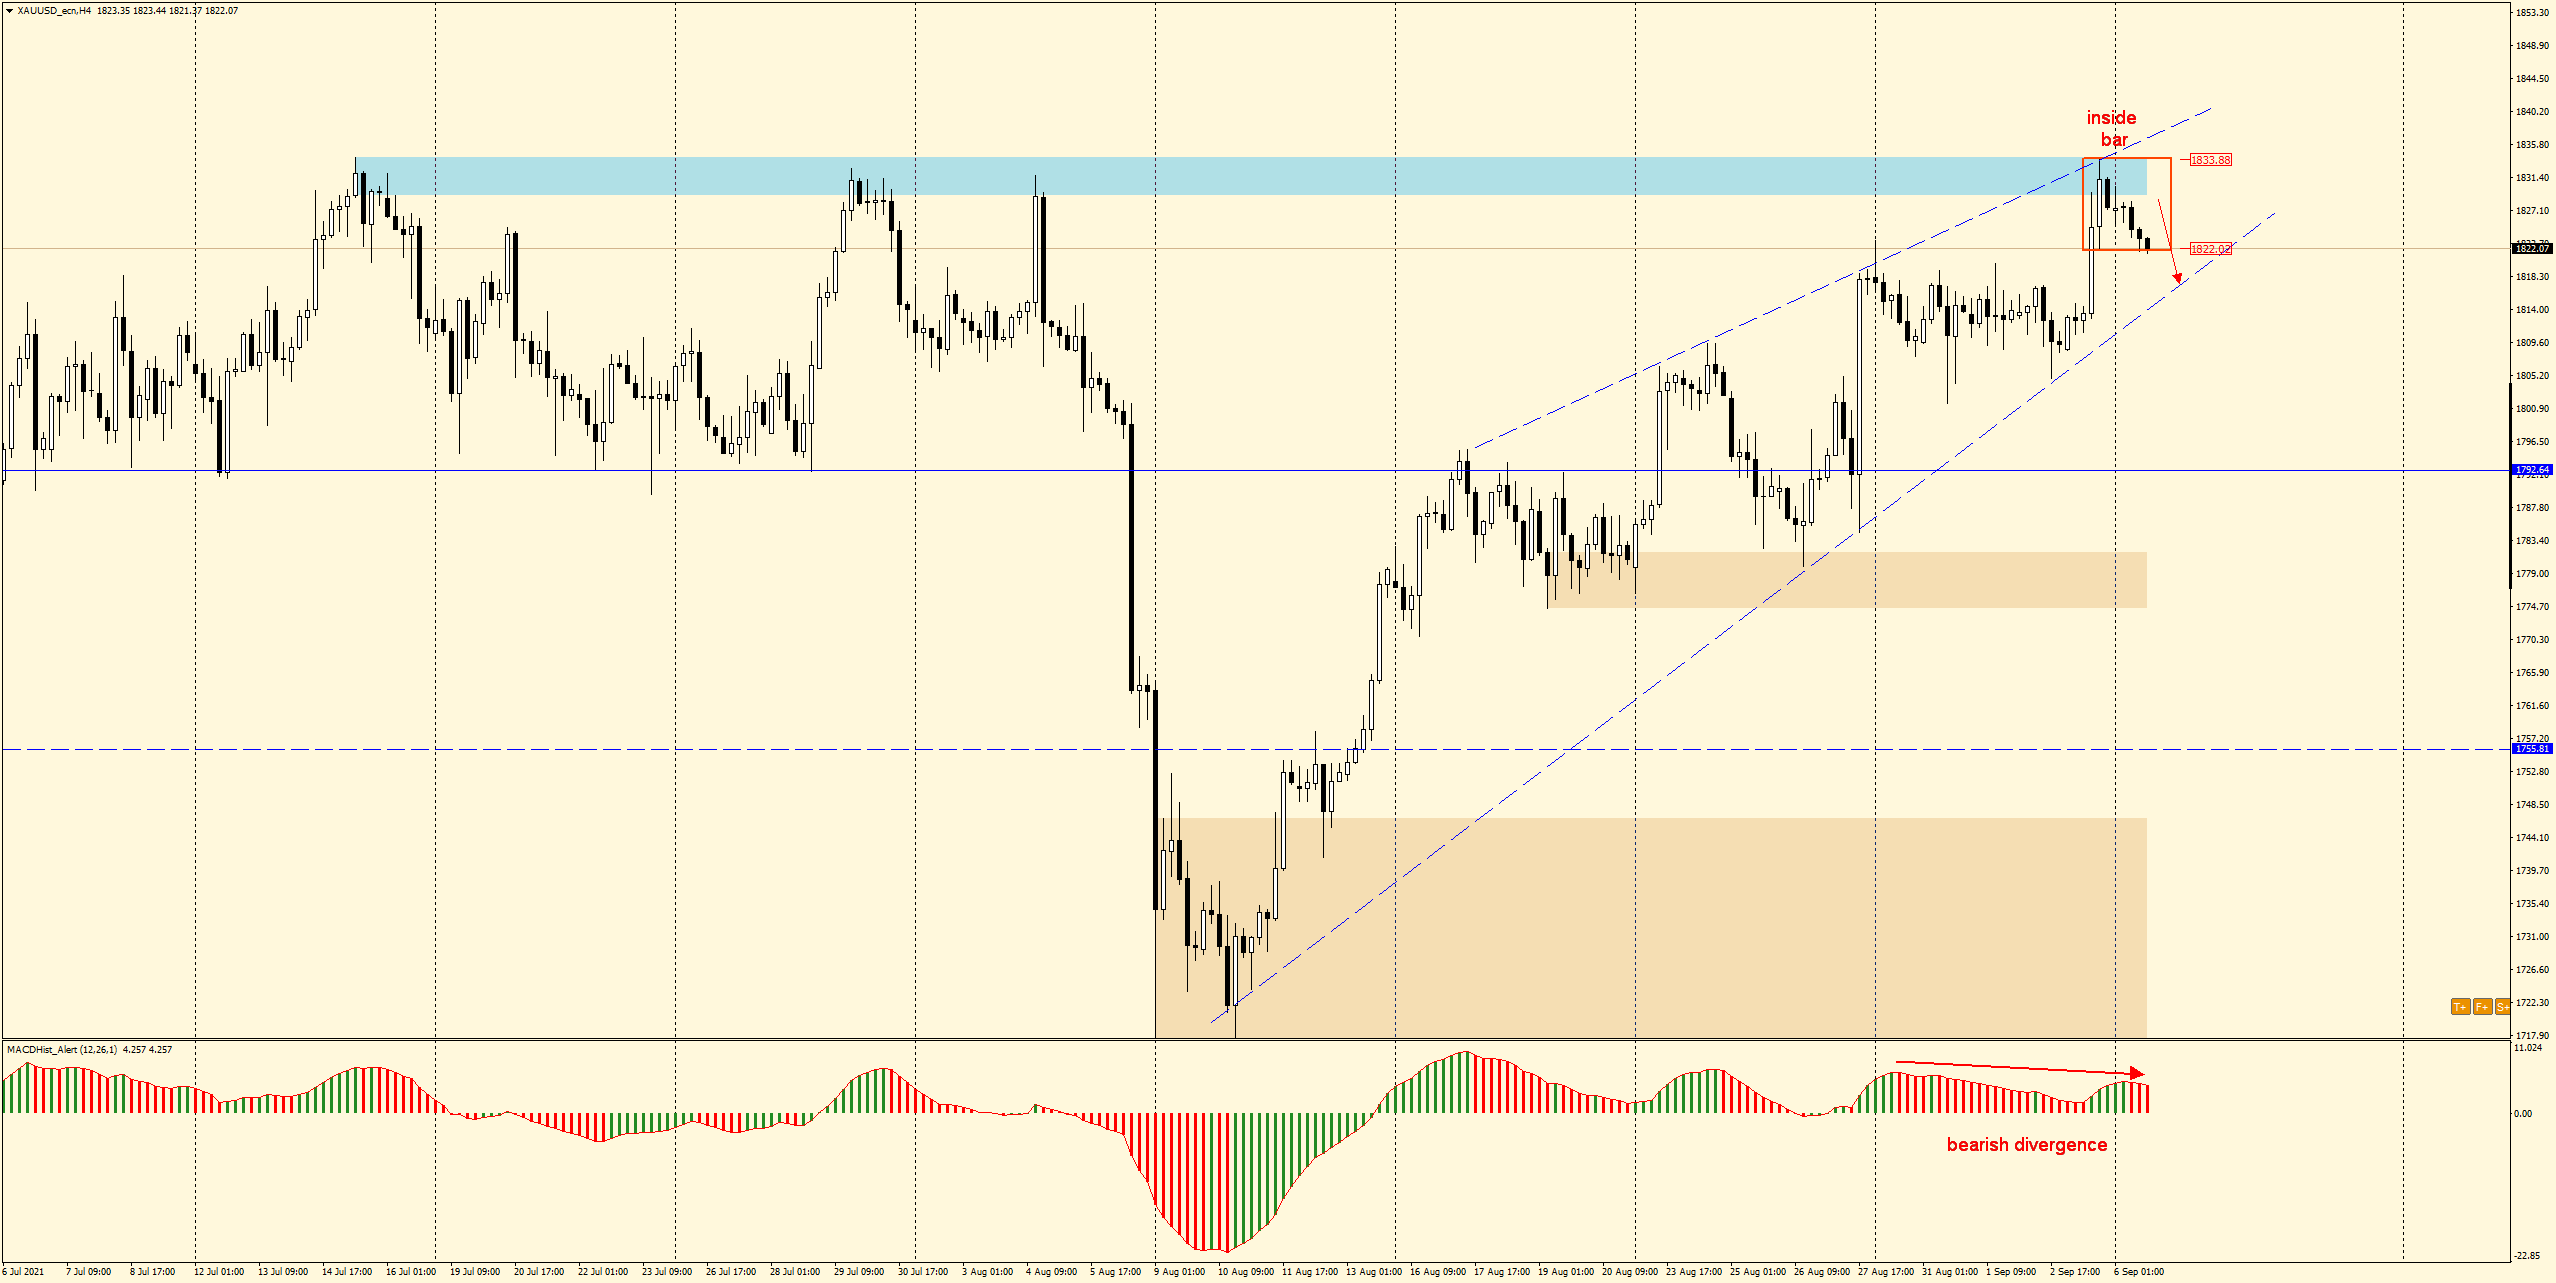 GOLD H4 - inside bar and downward divergence suggest continuation of downward correction